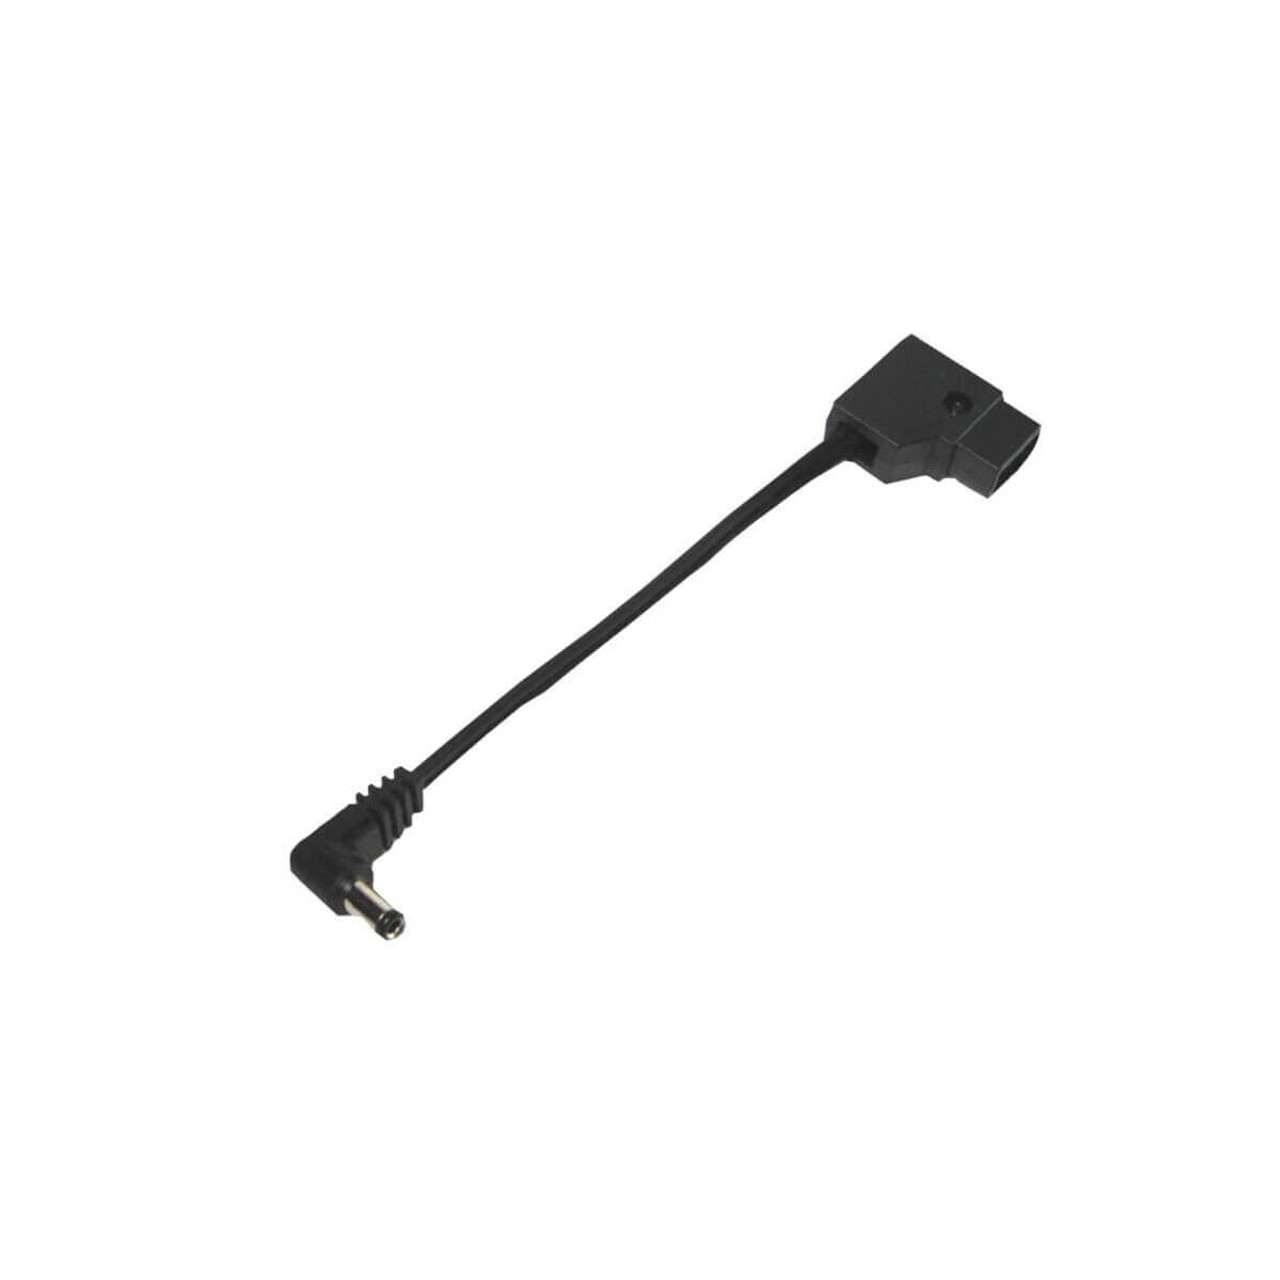 Litepanels 900-3016 1x1 D-Tap Power Cable For Battery Adapter Plates 